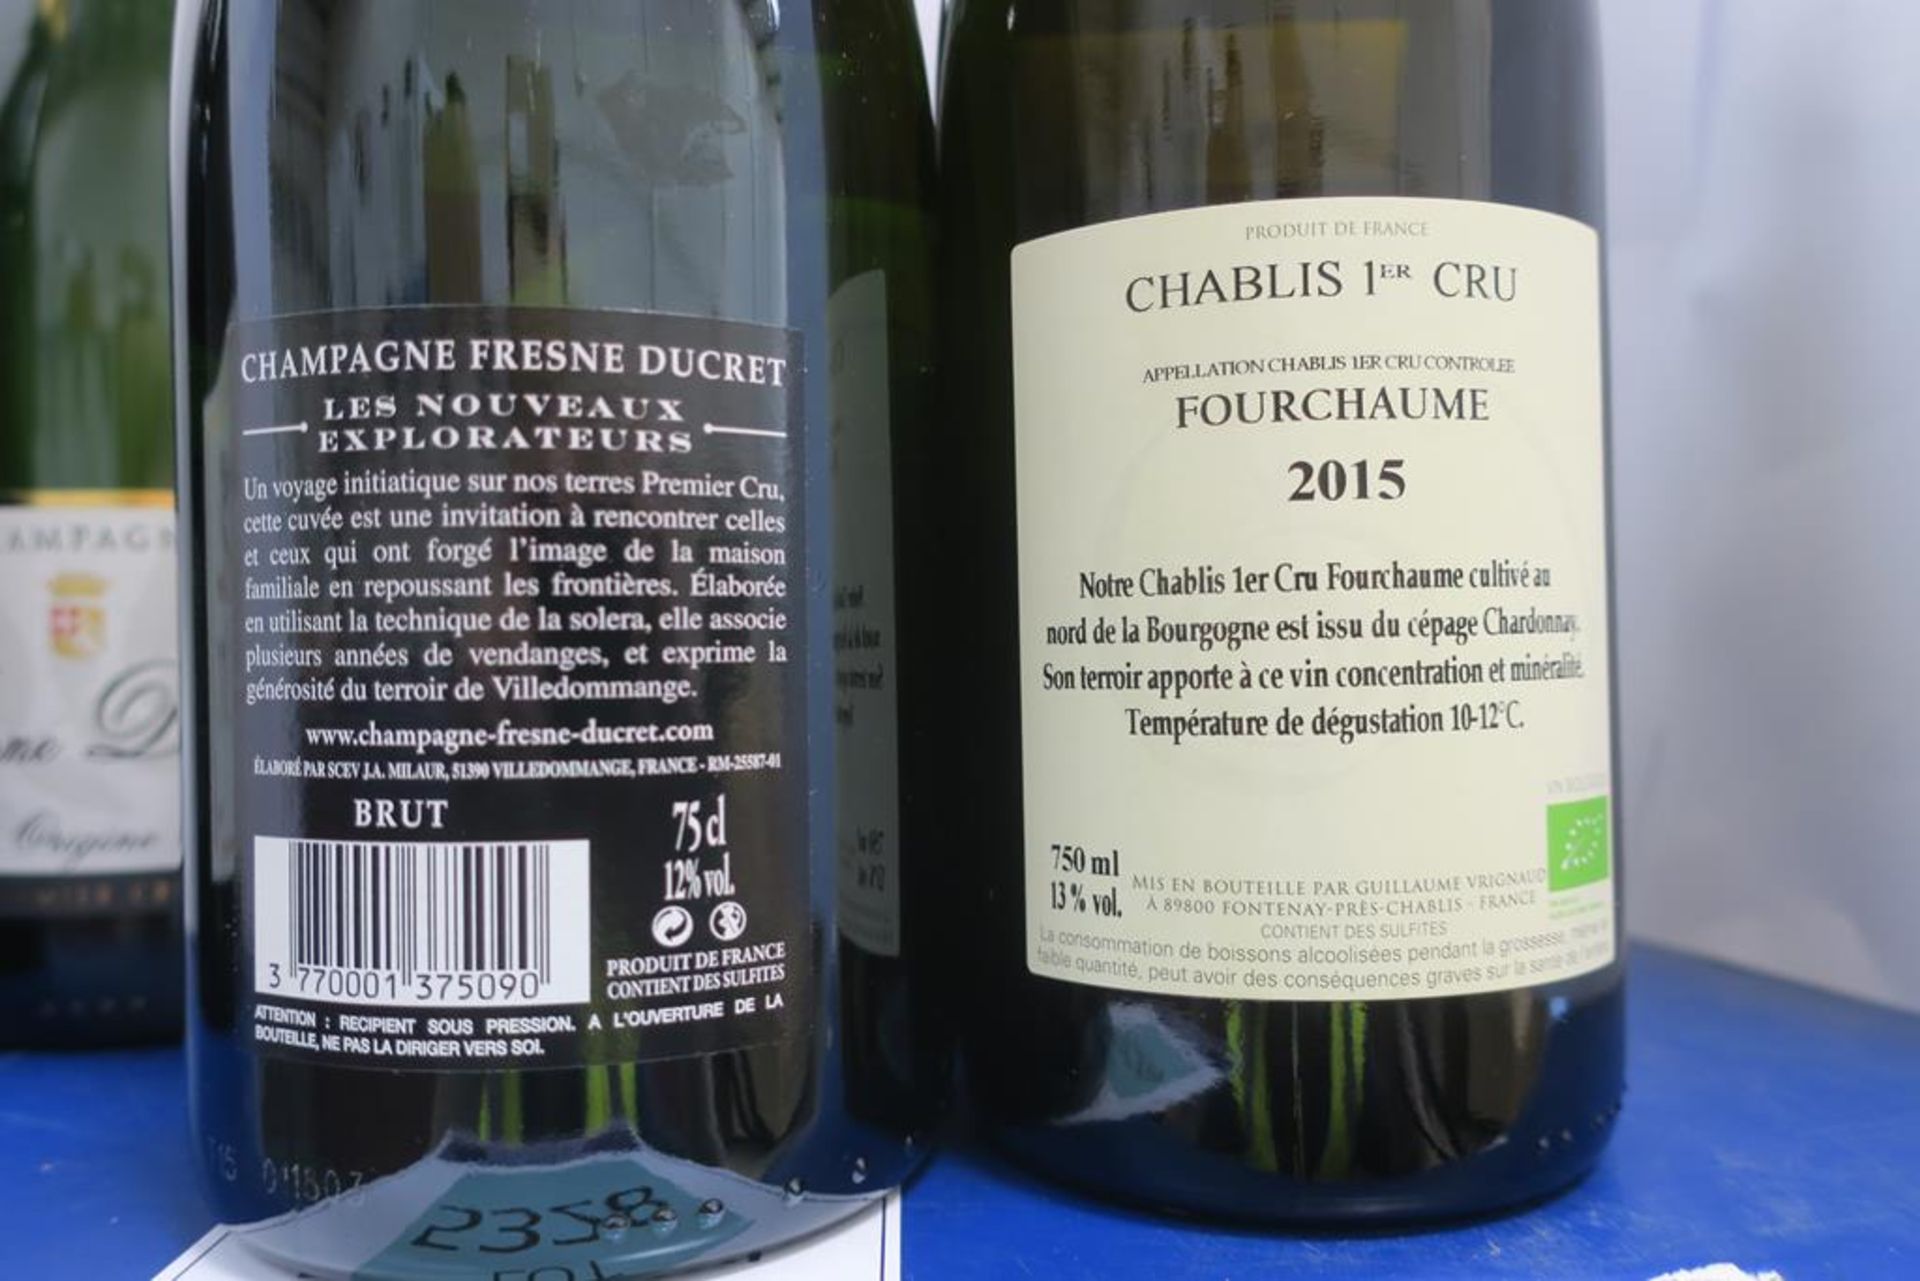 Fresne Ducret Champagne, Domaine Pillot Red Wine and Domaine Vrignaud Chablis White Wine - Image 3 of 3